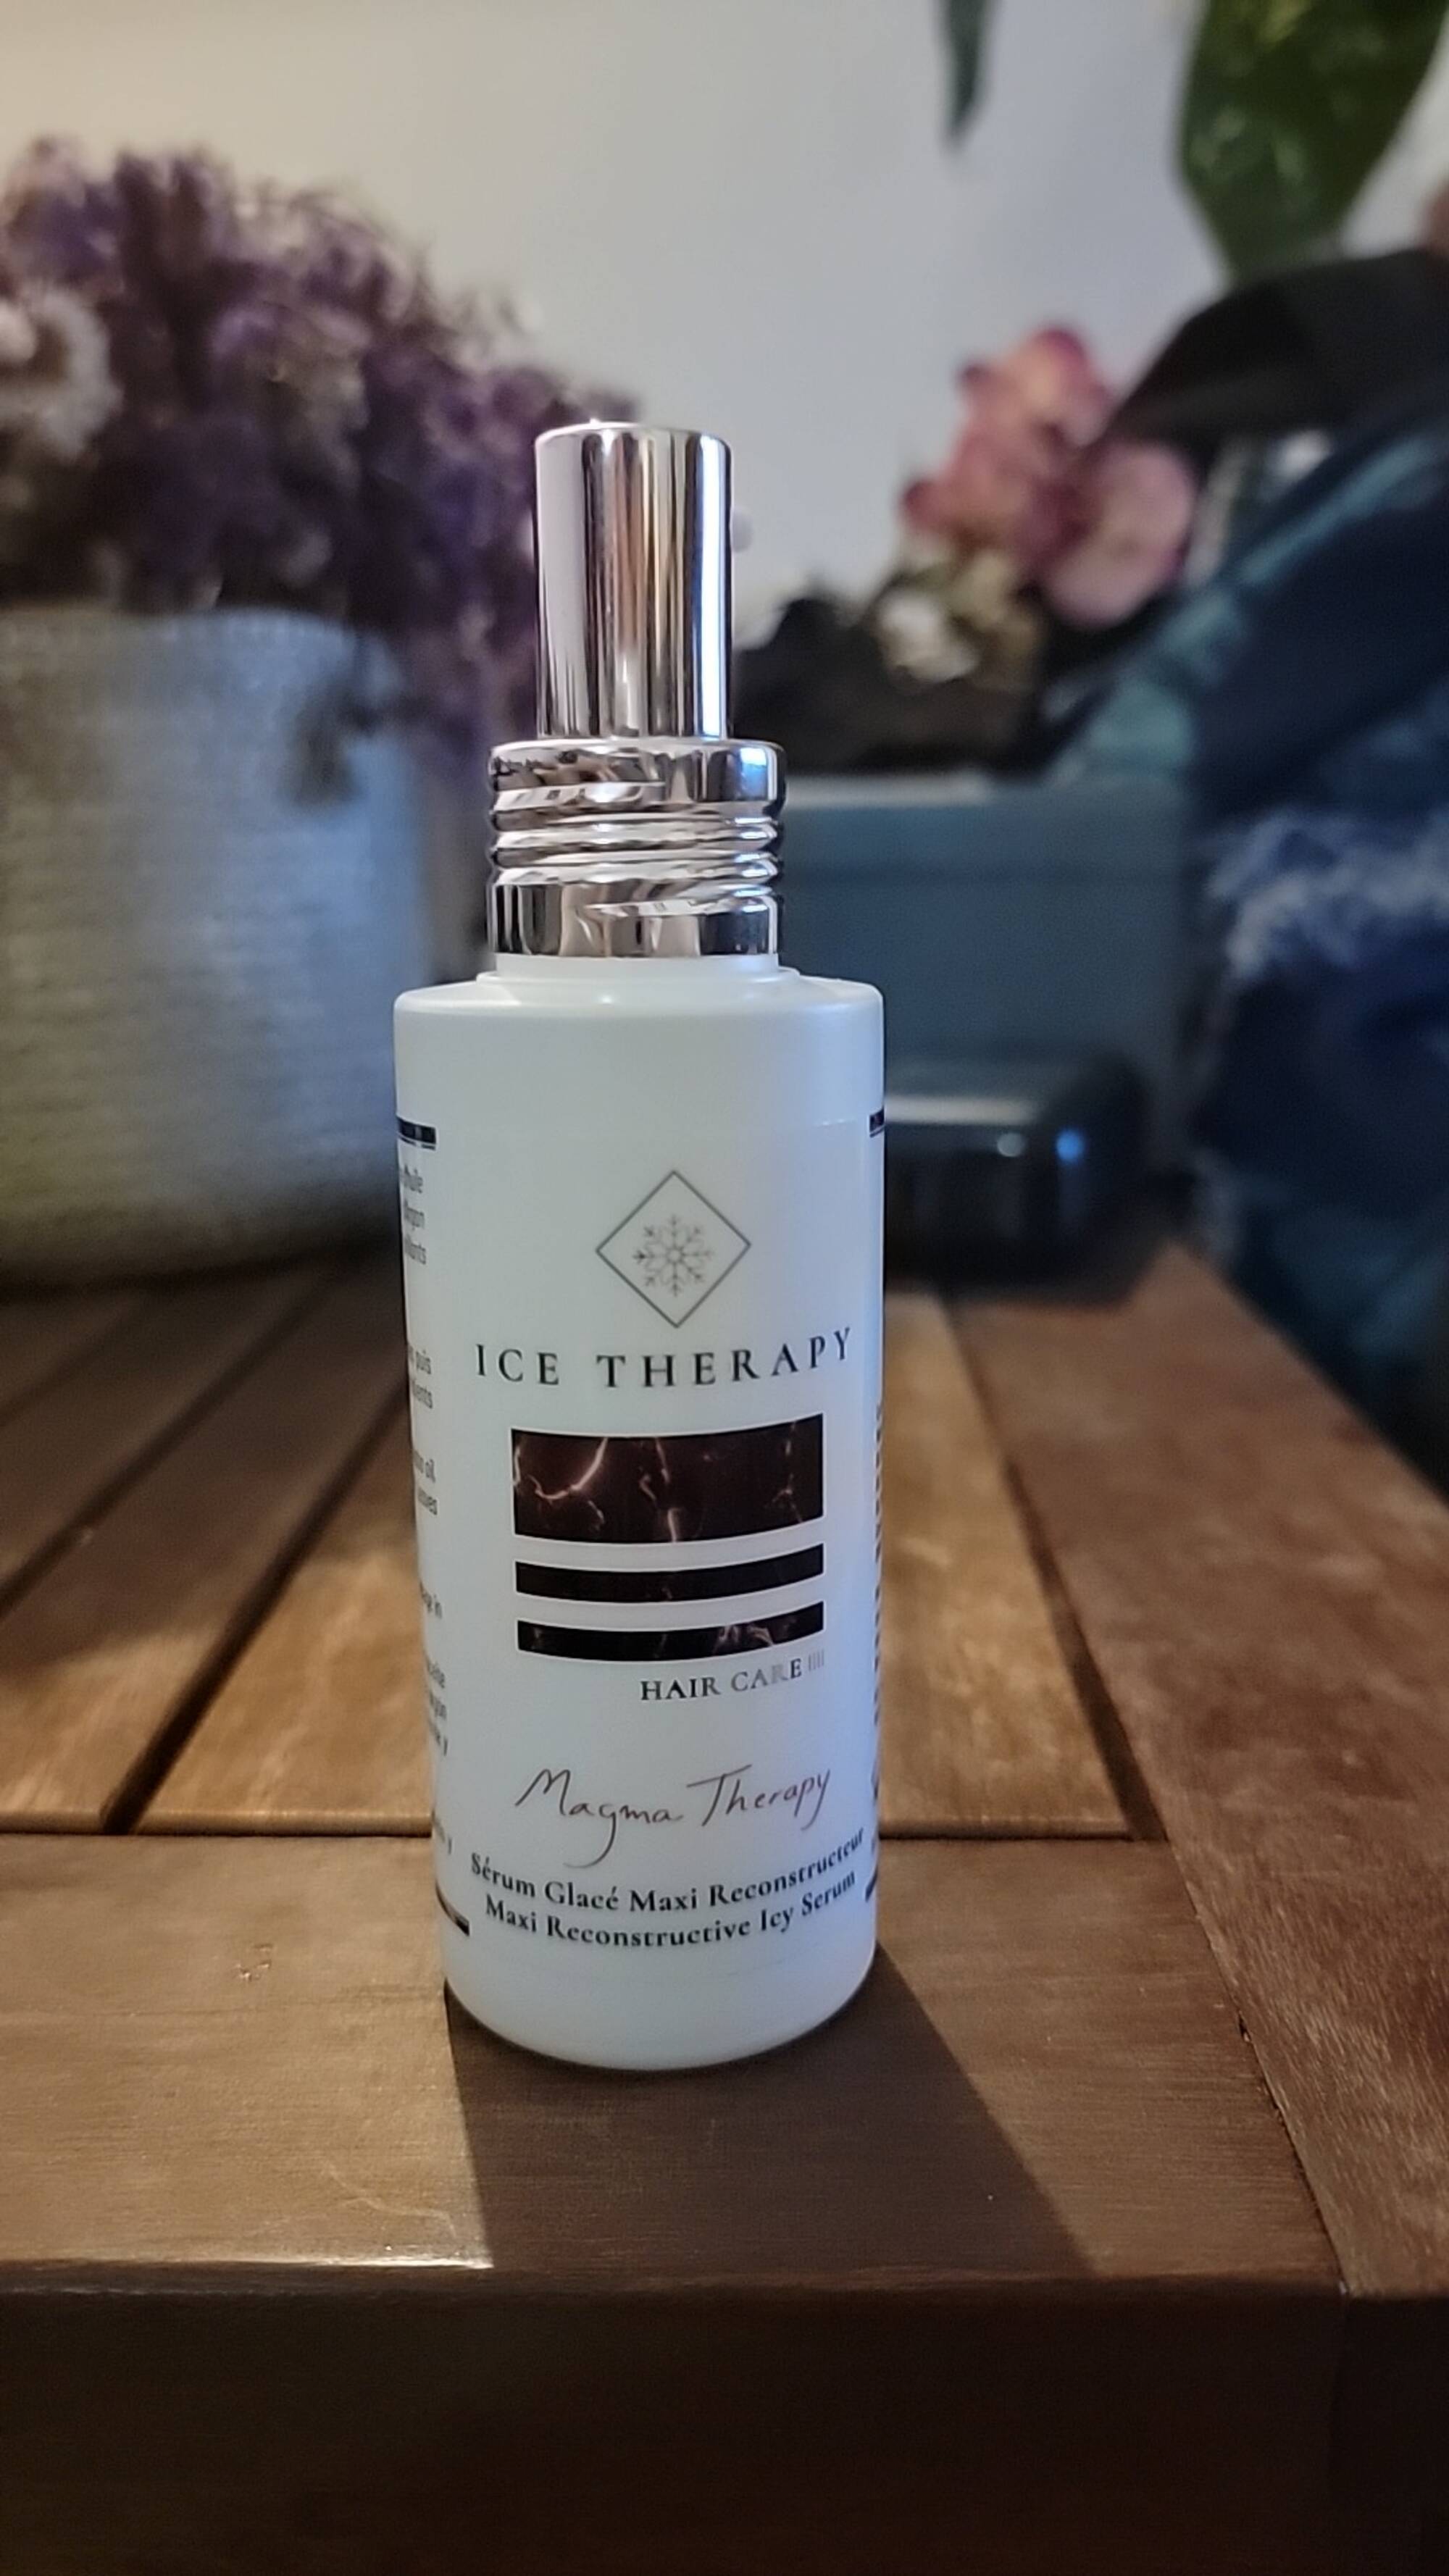 ICE THERAPY - Magma therapy - Sérum glacé maxi reconstructeur